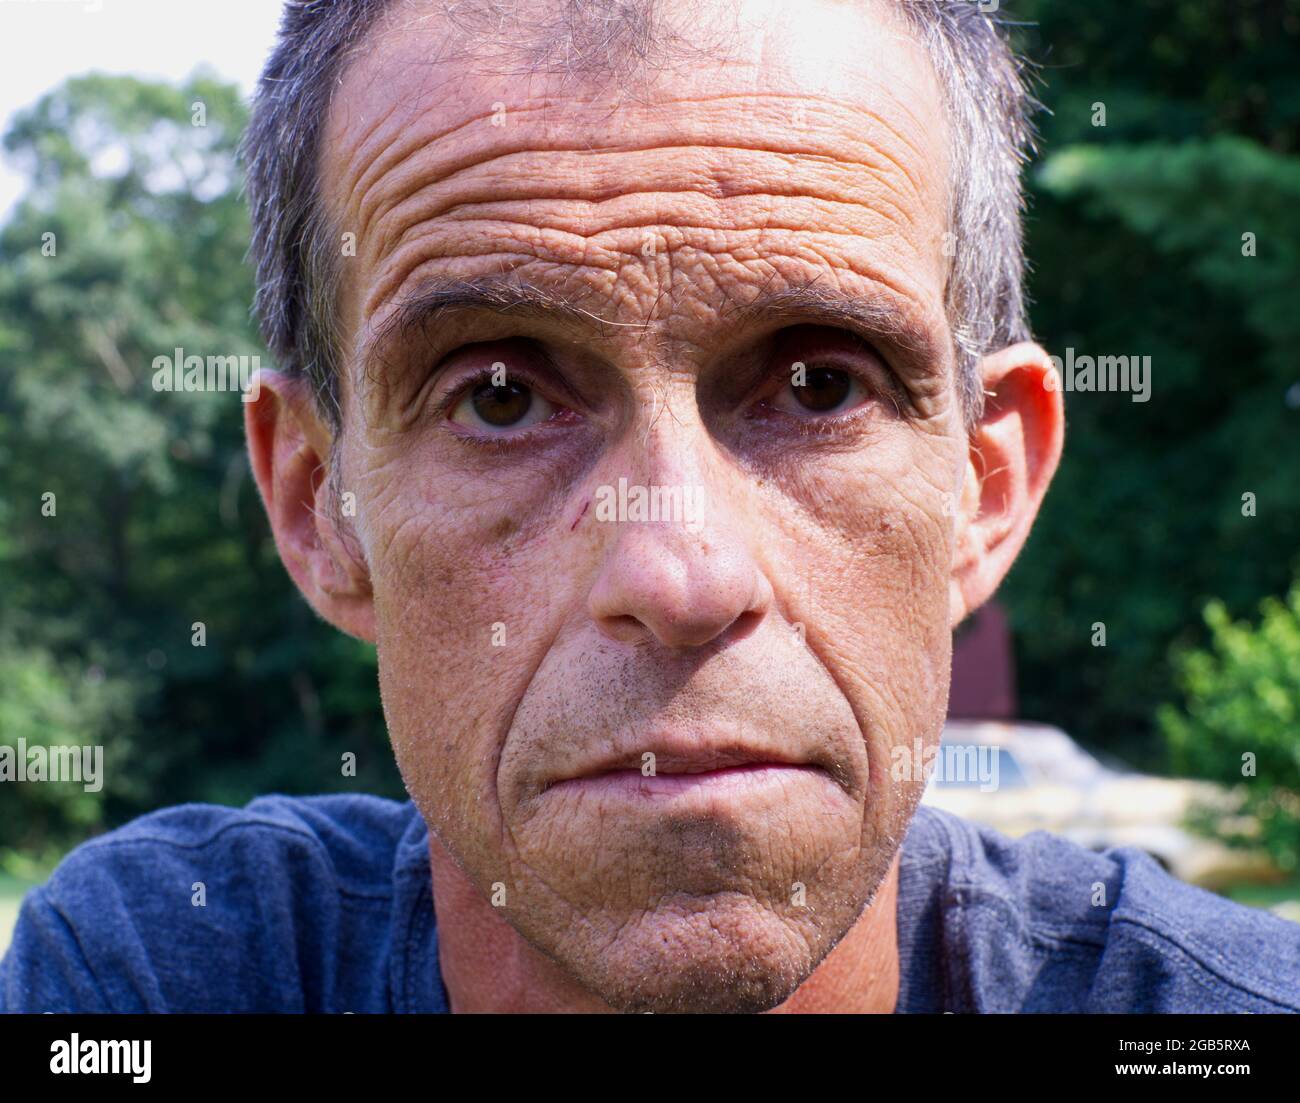 A Close Up of a Middle Aged Male's Facial Expression Stock Photo